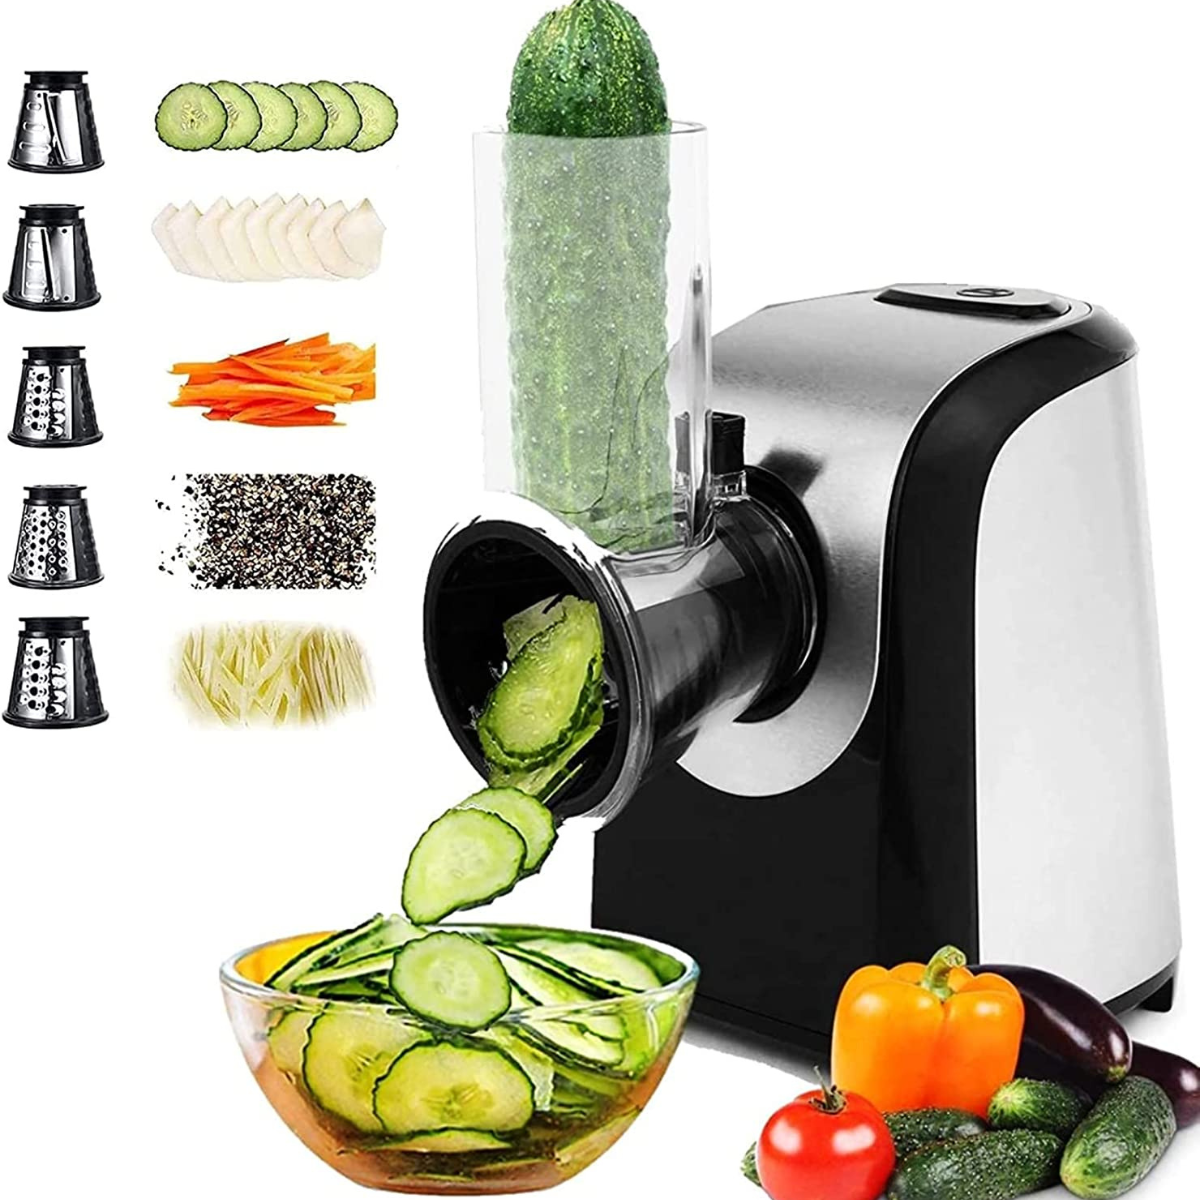 5-in-1 Electric Cheese Grater: Effortless Slicing, Shredding & Spiralizing, by iohhjghjhj